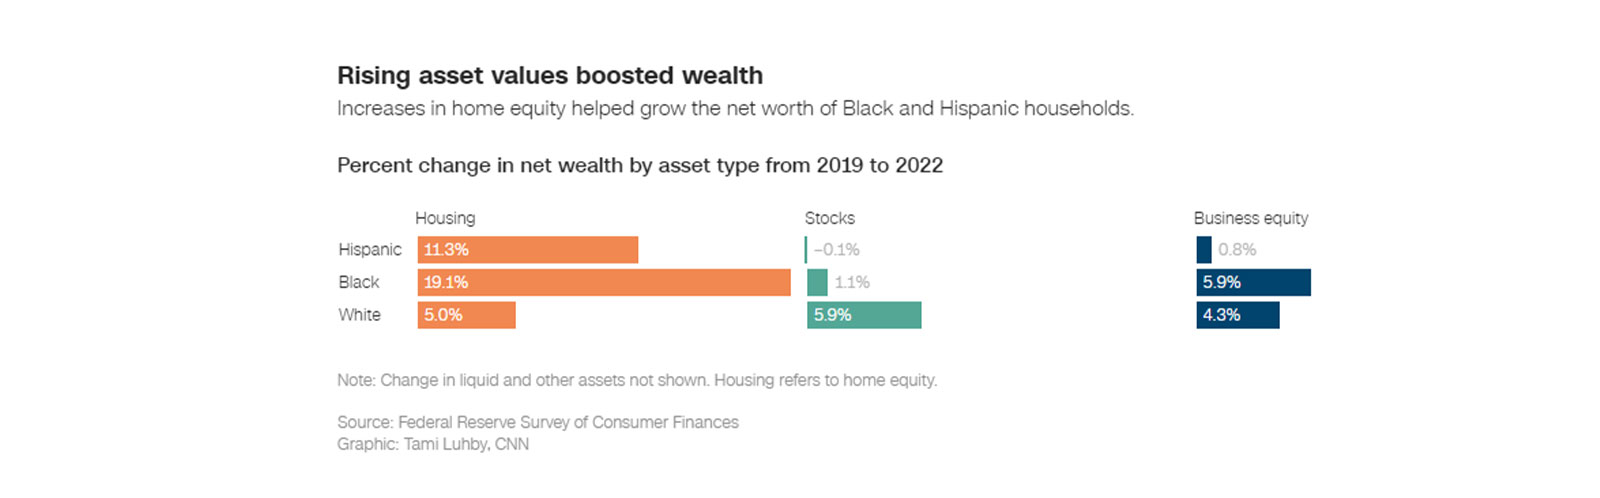 Rising asset values boosted wealth Increases in home equity helped grow the net worth of Black and Hispanic households. Percent change in net wealth by asset type from 2019 to 2022